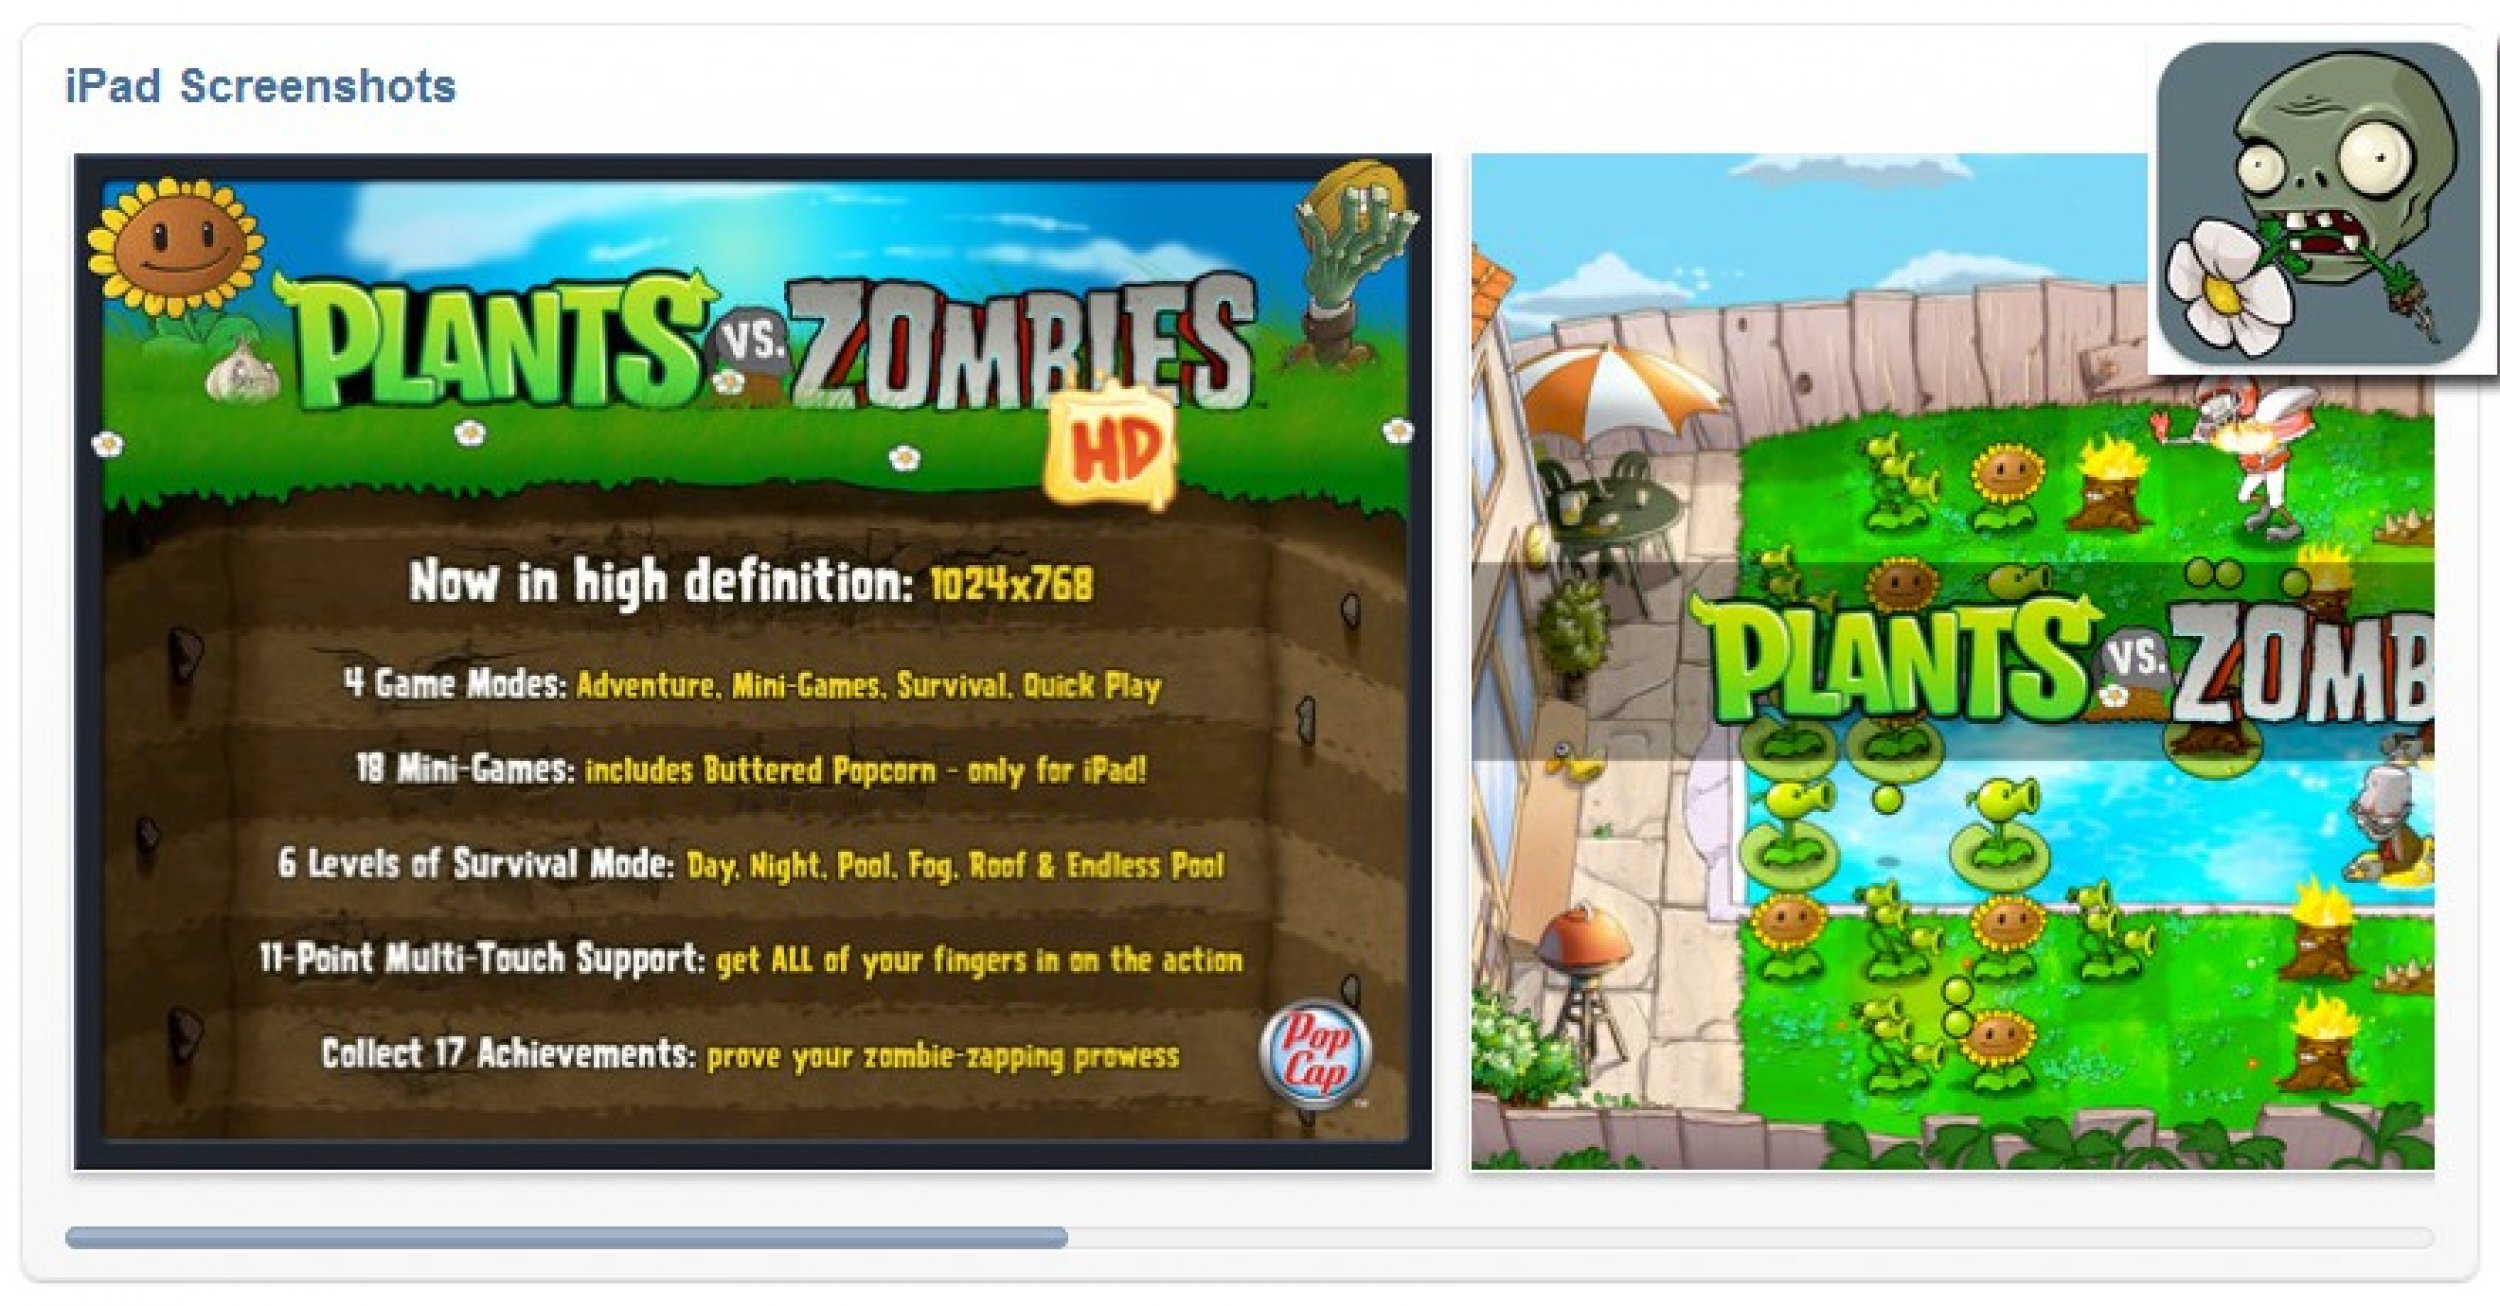 Plants vs. Zombies HD Game - Top 50 must-have iPad apps